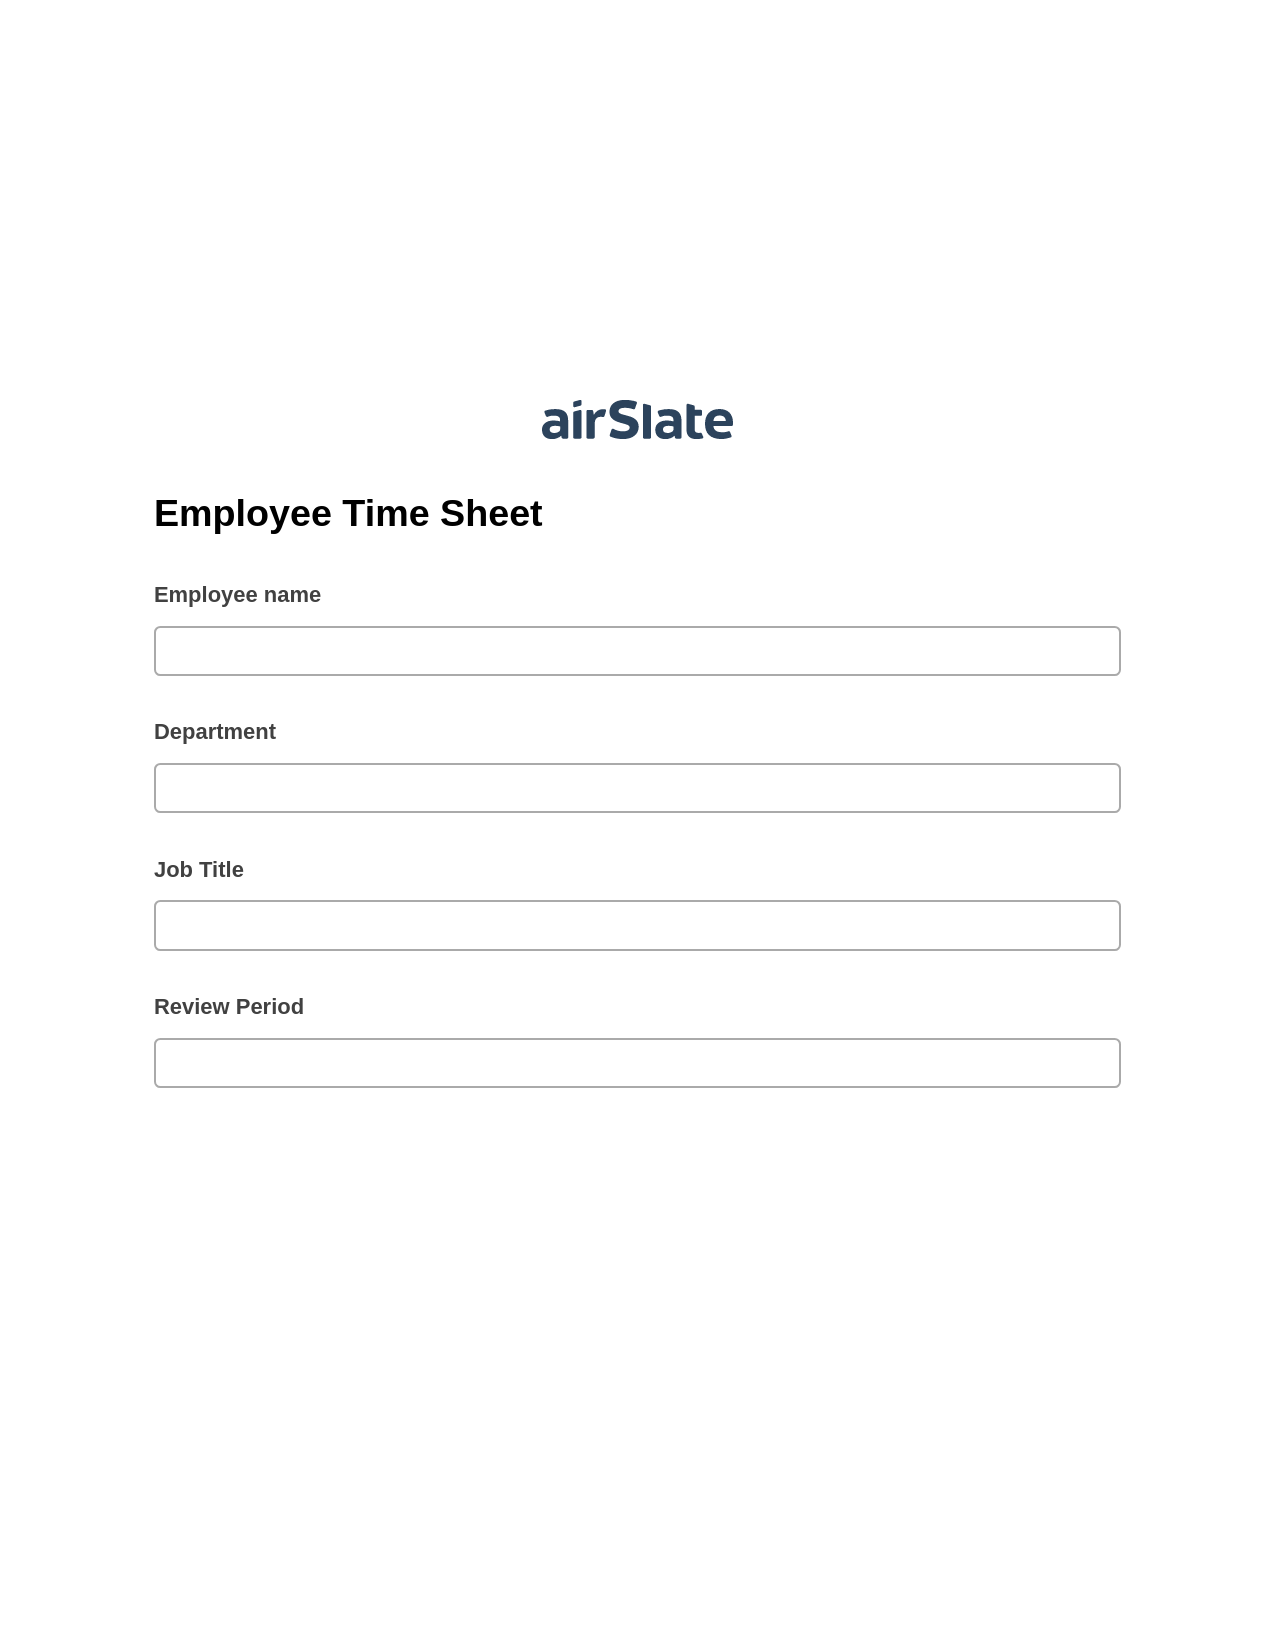 Multirole Employee Time Sheet Pre-fill Dropdowns from CSV file Bot, Lock the Slate Bot, Archive to OneDrive Bot